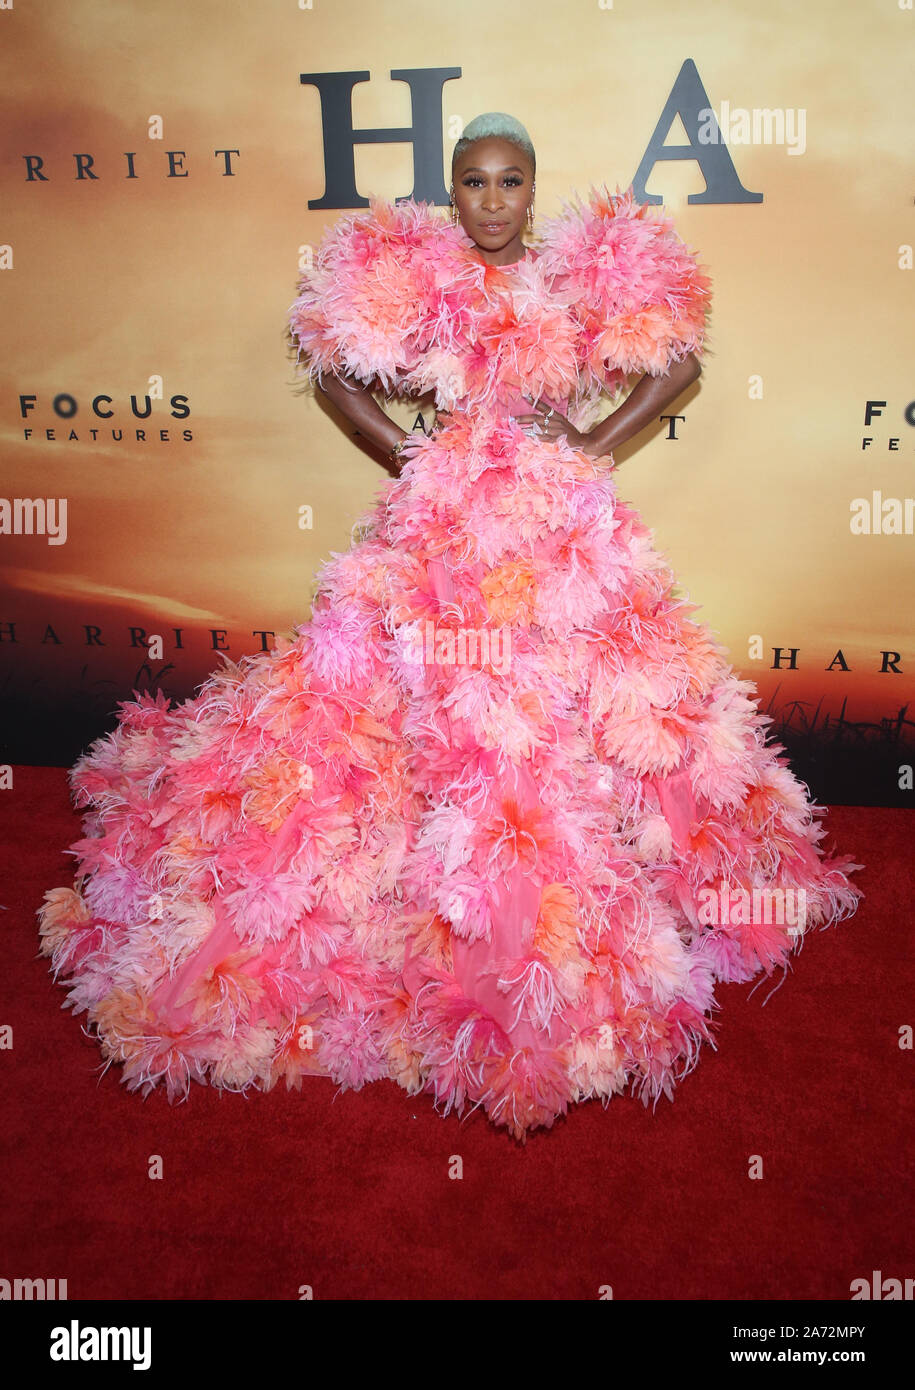 Los Angeles, Ca. 29th Oct, 2019. Cynthia Erivo at the Los Angeles Premiere of Harriet at The Orpheum in Los Angeles, California on October 29, 2019. Credit: Faye Sadou/Media Punch/Alamy Live News Stock Photo